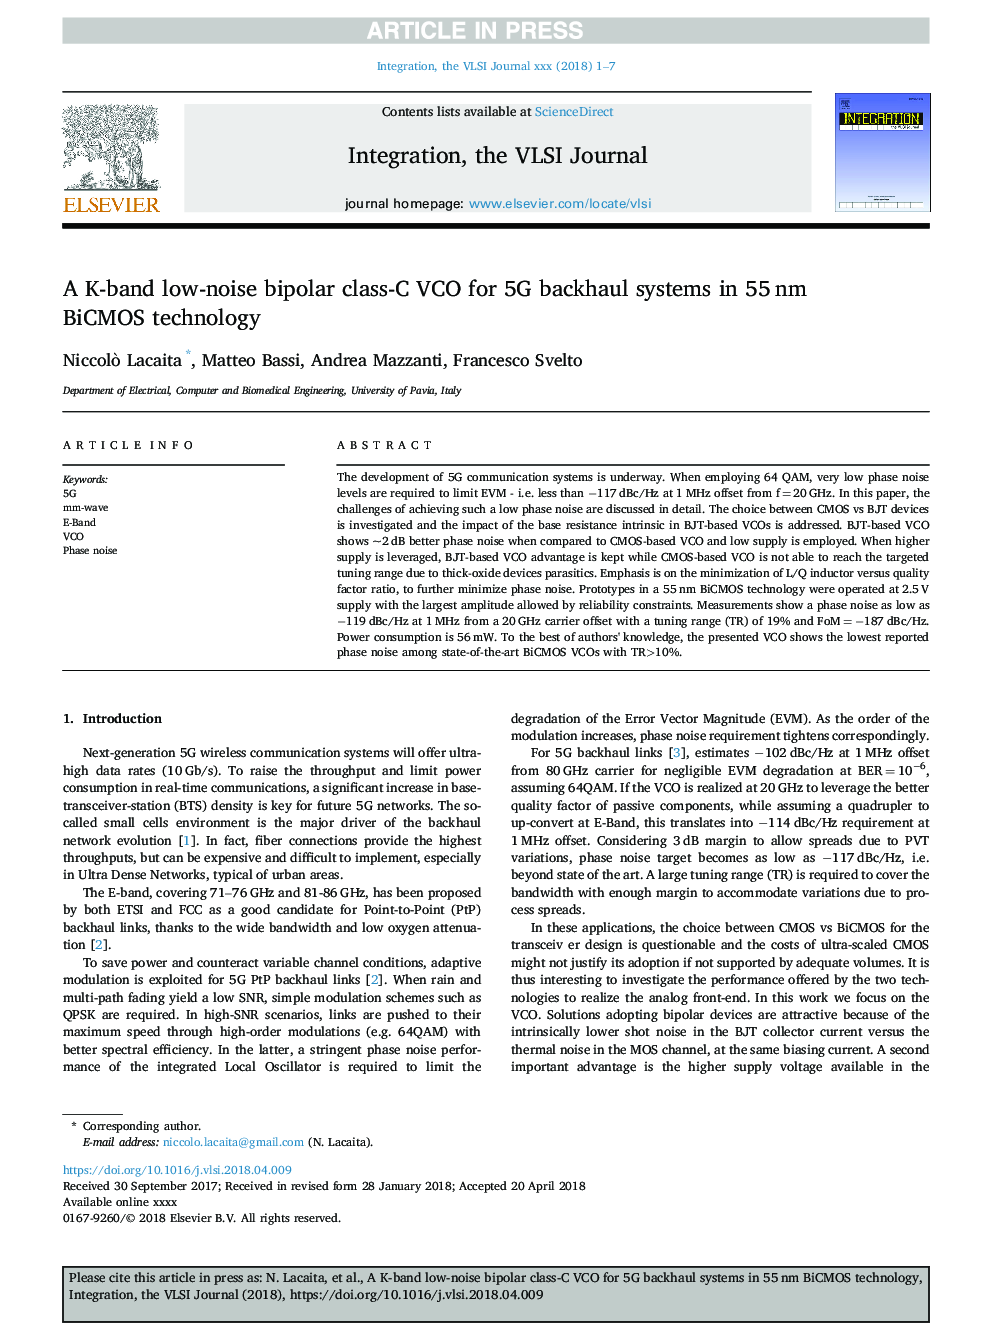 A K-band low-noise bipolar class-C VCO for 5G backhaul systems in 55â¯nm BiCMOS technology